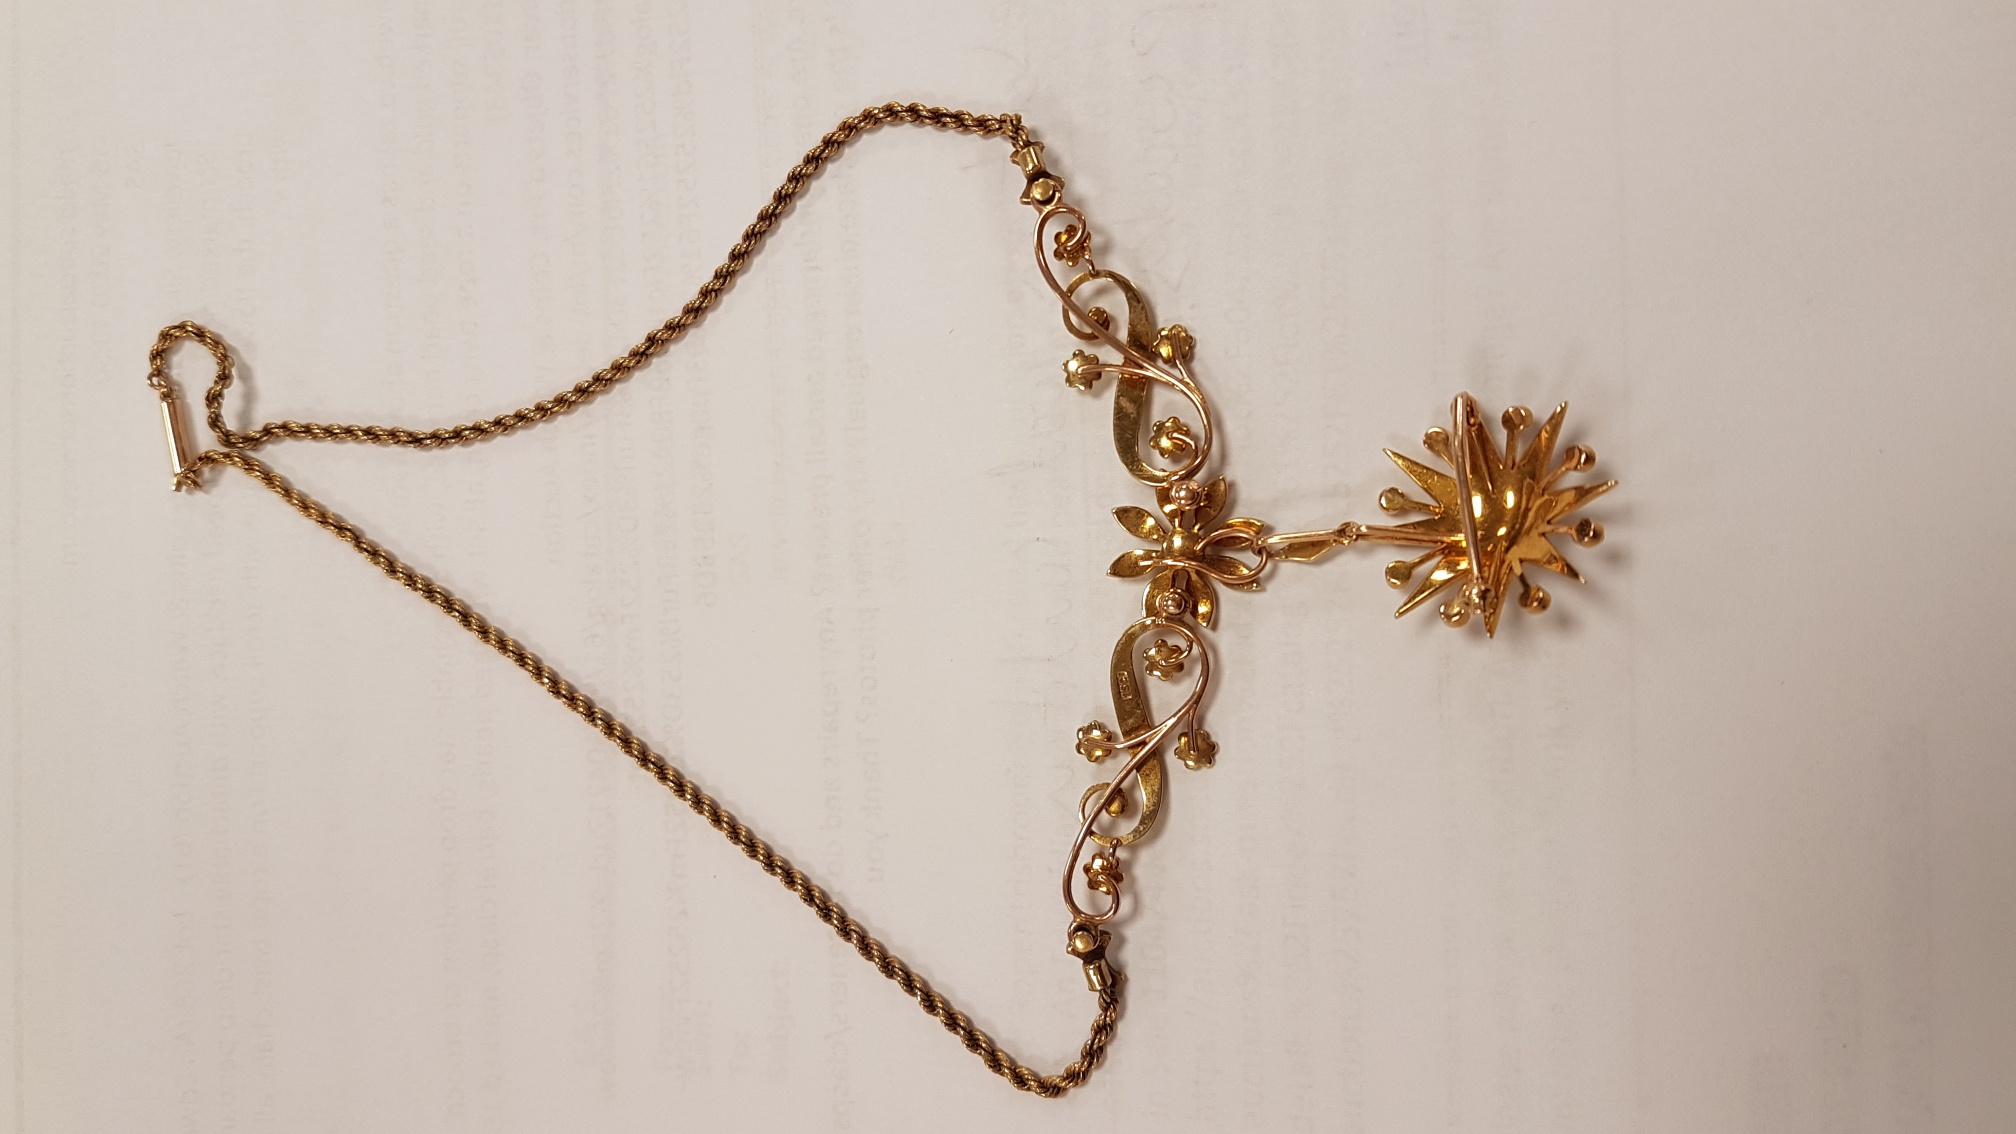 An Edwardian 15ct marked gold and seed pearl necklace, with detachable star drop pendant or - Image 3 of 3